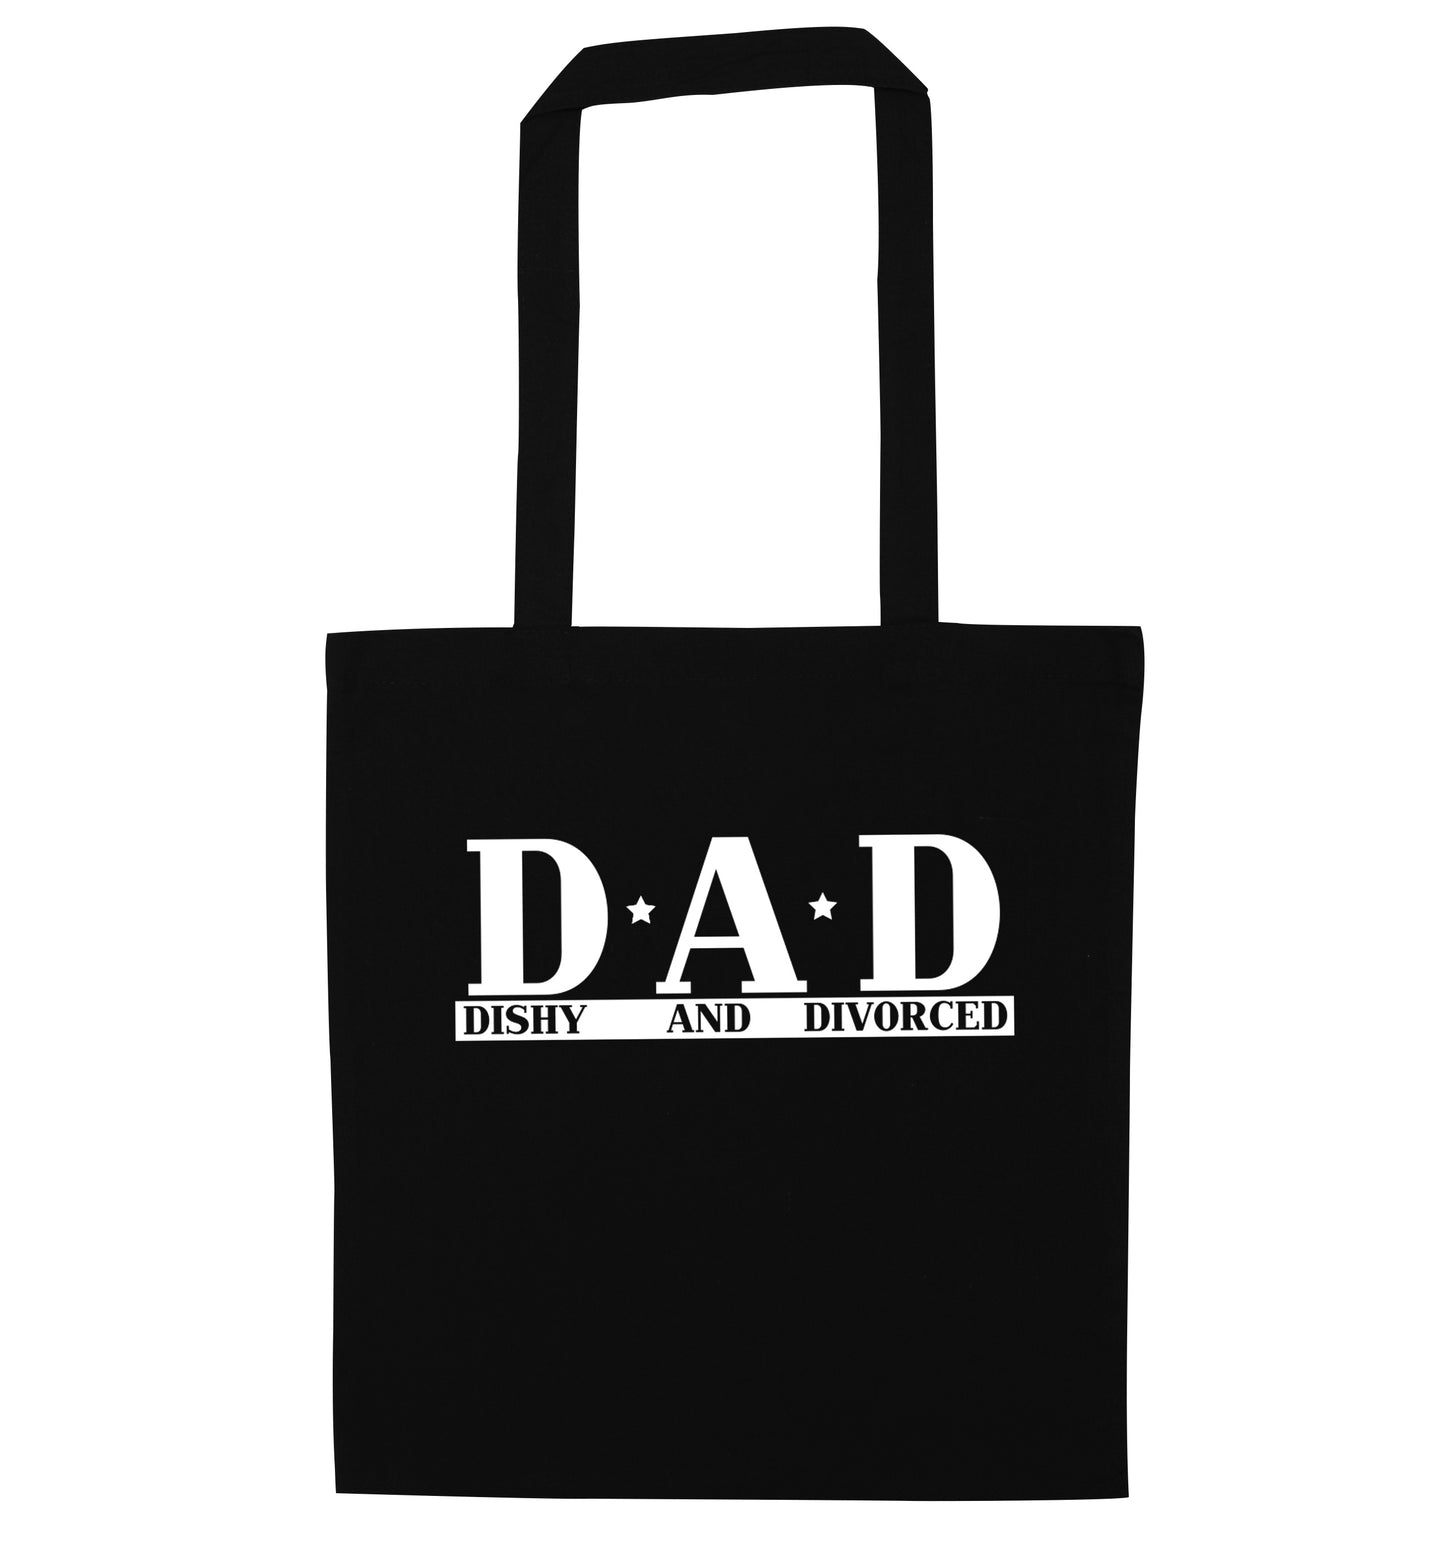 D.A.D meaning Dishy and Divorced black tote bag